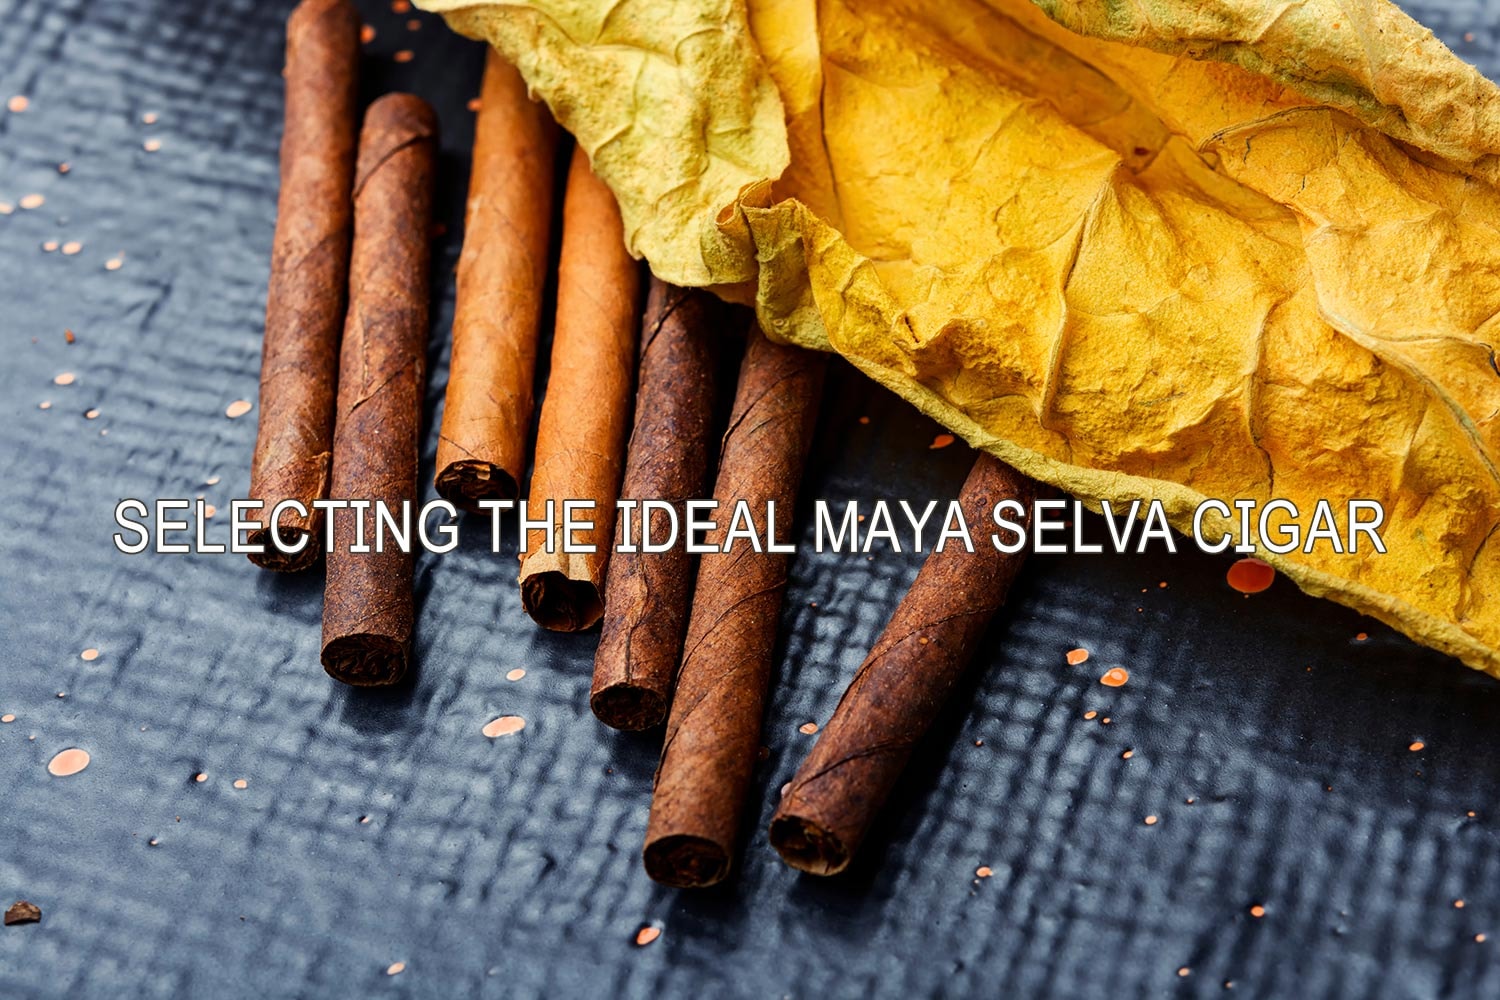 Artistic depiction of the cigar selection process by Maya Selva